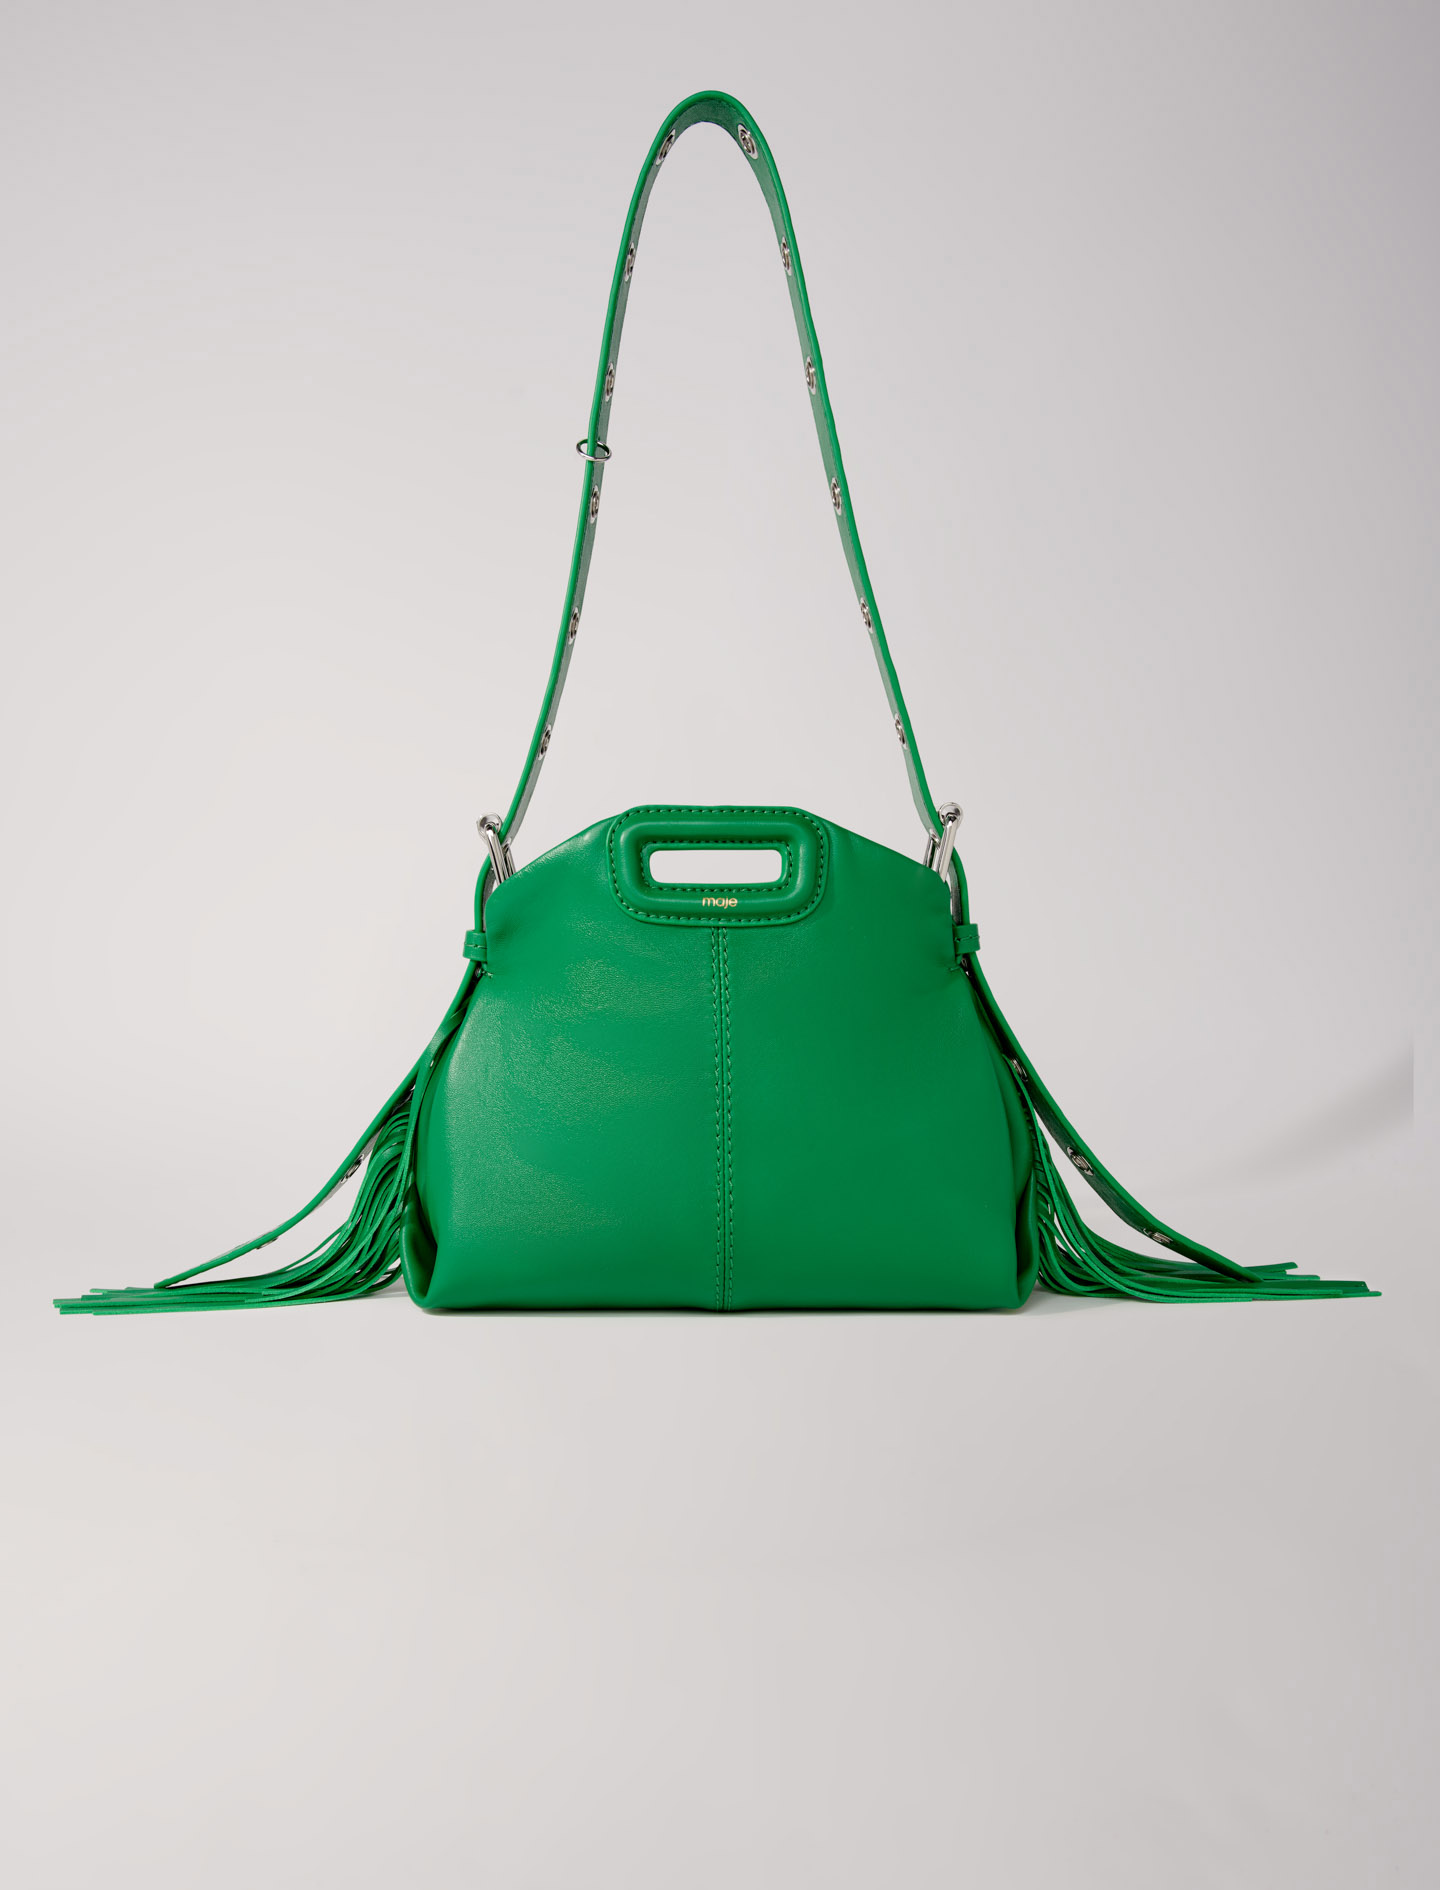 Mixte's polyester Leather: Smooth leather mini Miss M bag for Spring/Summer, size Mixte-All Bags-OS (ONE SIZE), in color Green / Grey